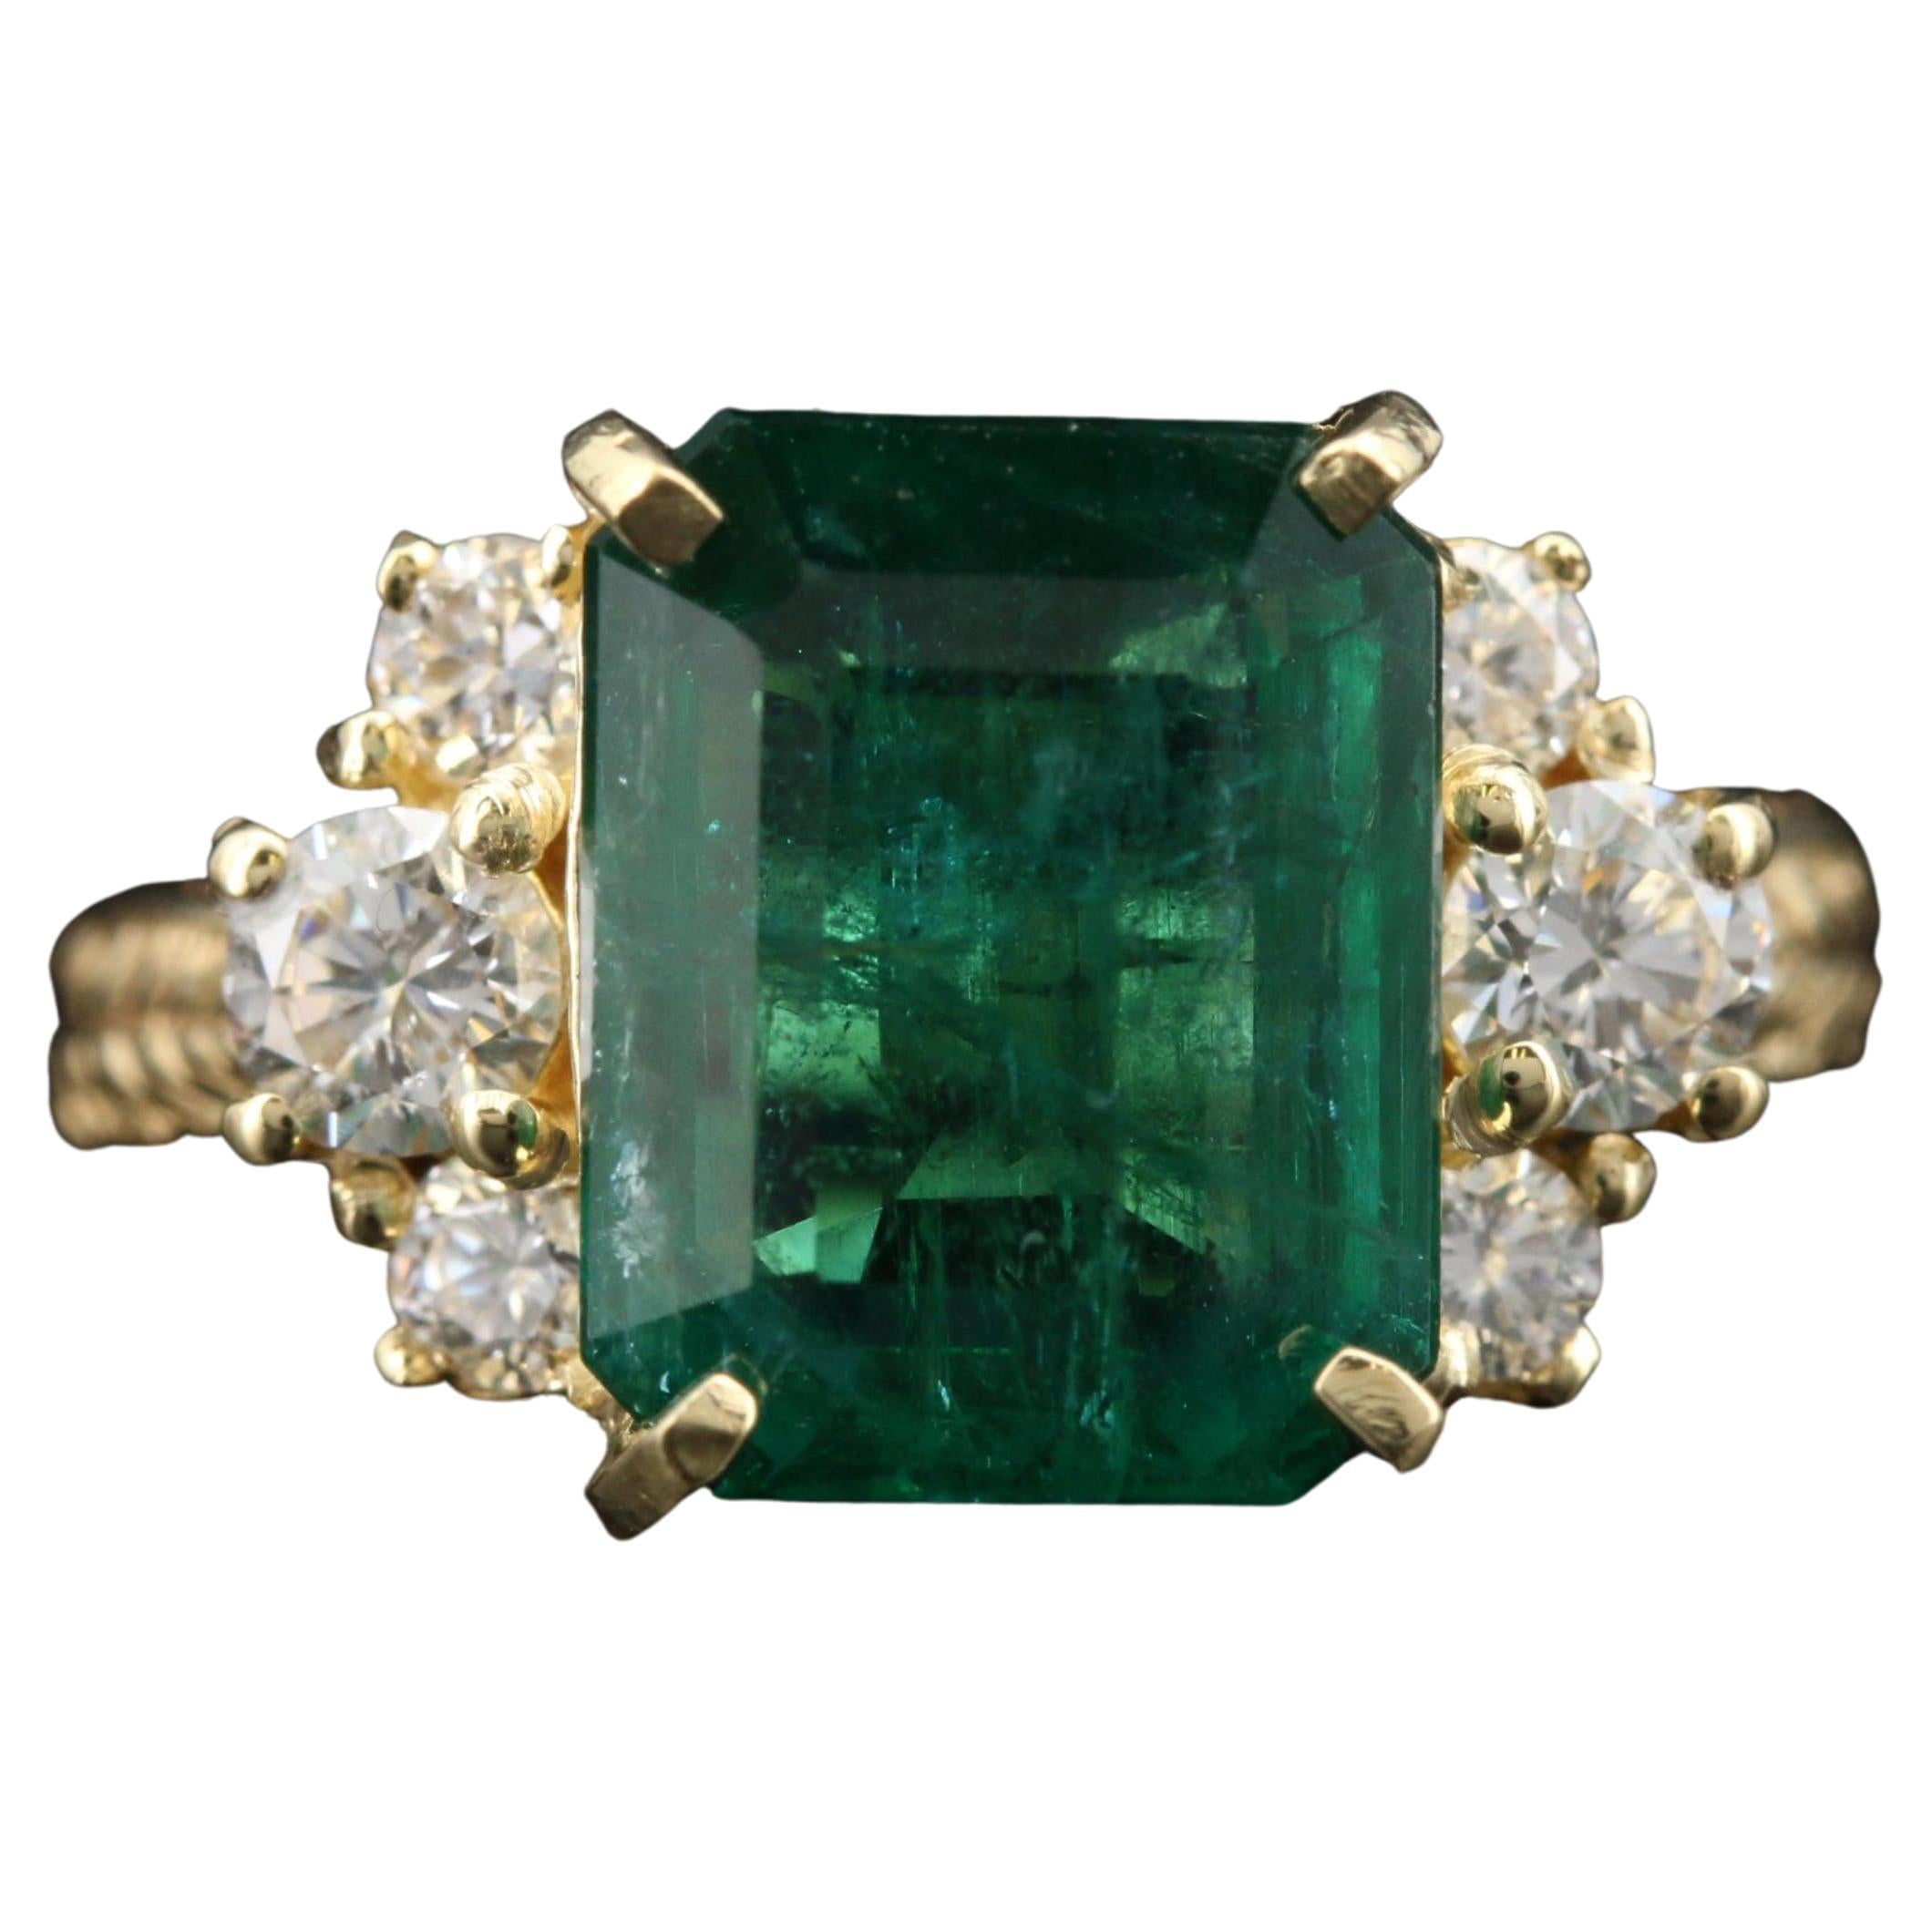 For Sale:  4 Carat Natural Emerald Diamond Engagement Ring Set in 18K Gold, Cocktail Ring